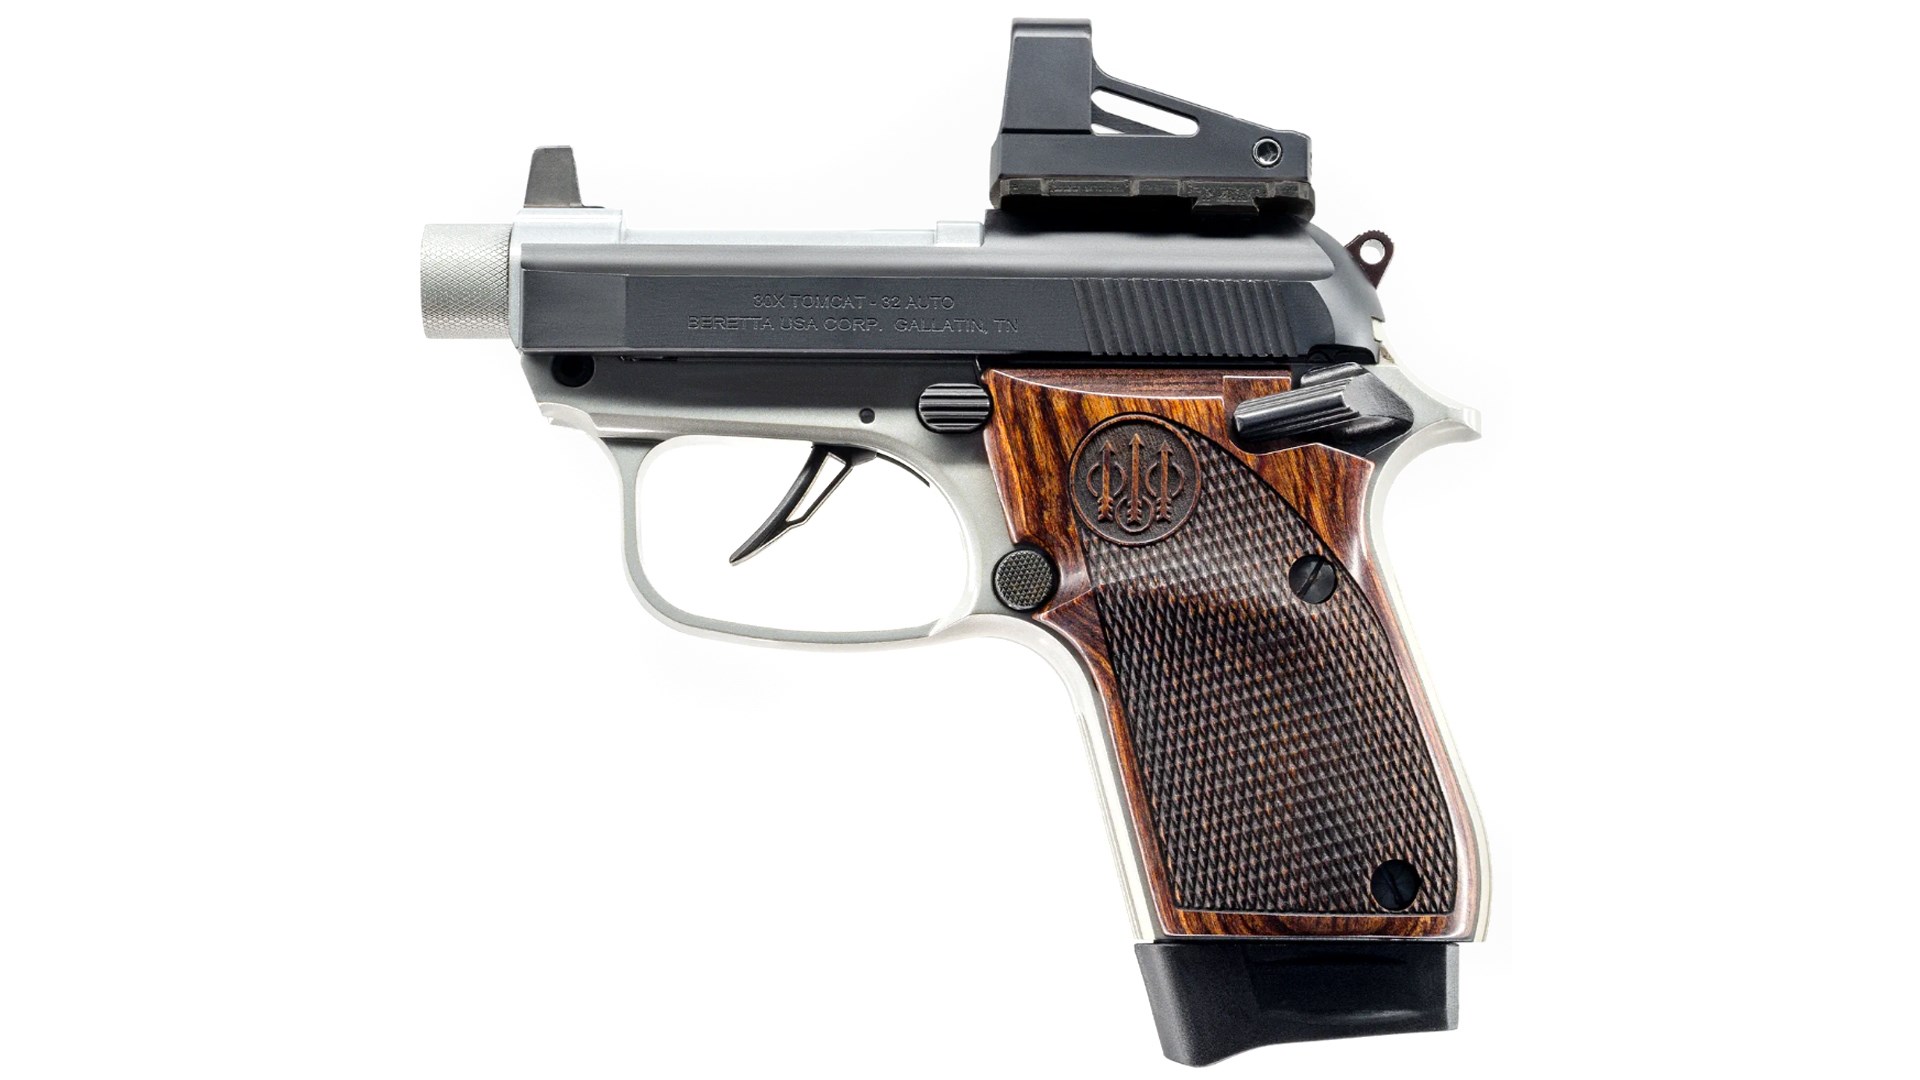 A Beretta 30X with a mounted red-dot sight.